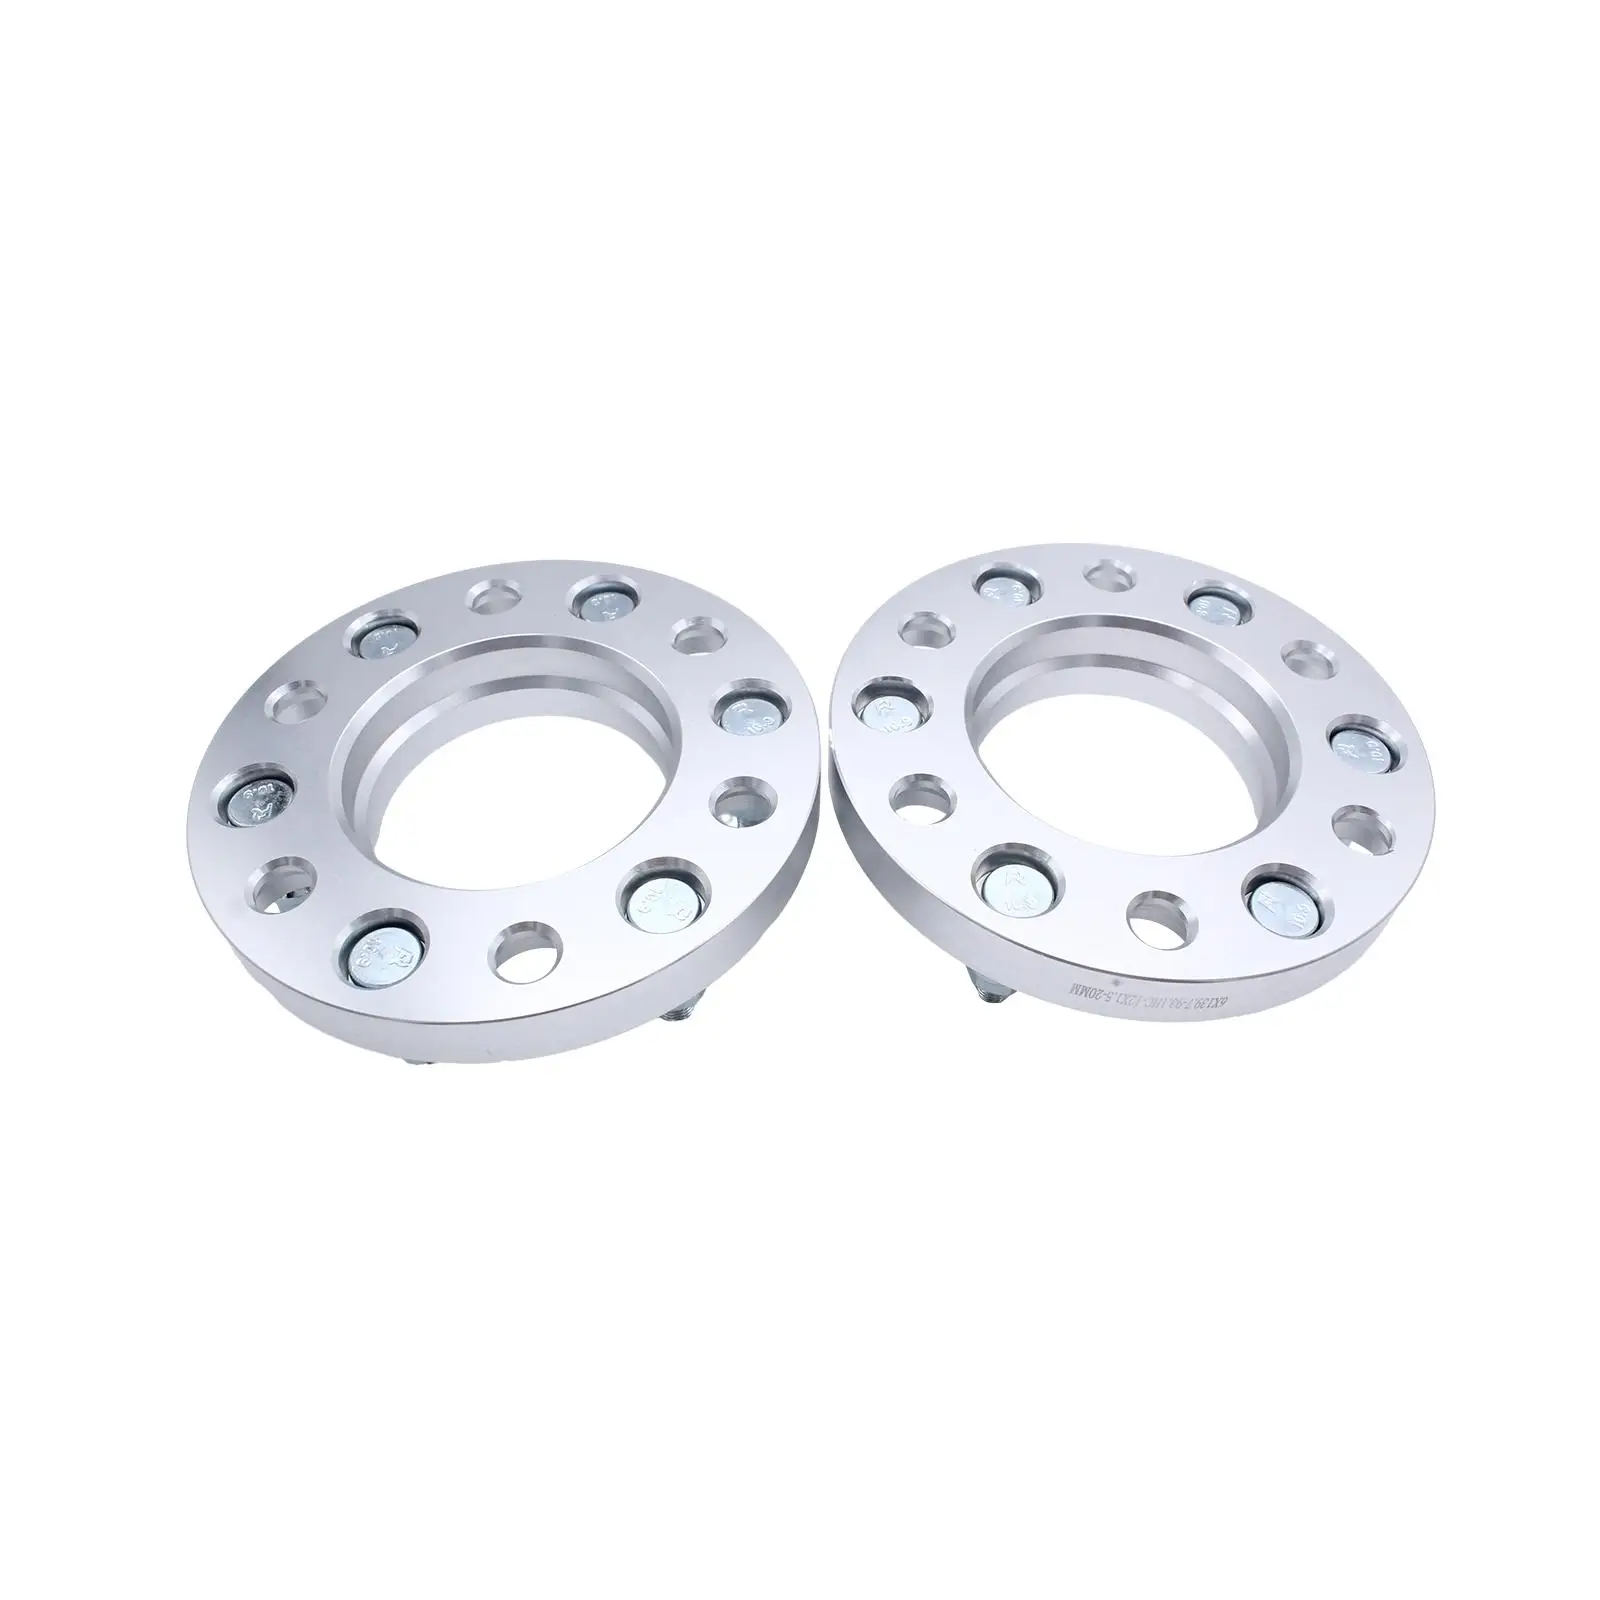 2Pcs Wheel Spacers Metal Sturdy with Bolts for Ranger Stable Performance Easily Install Automotive Accessories Replacement